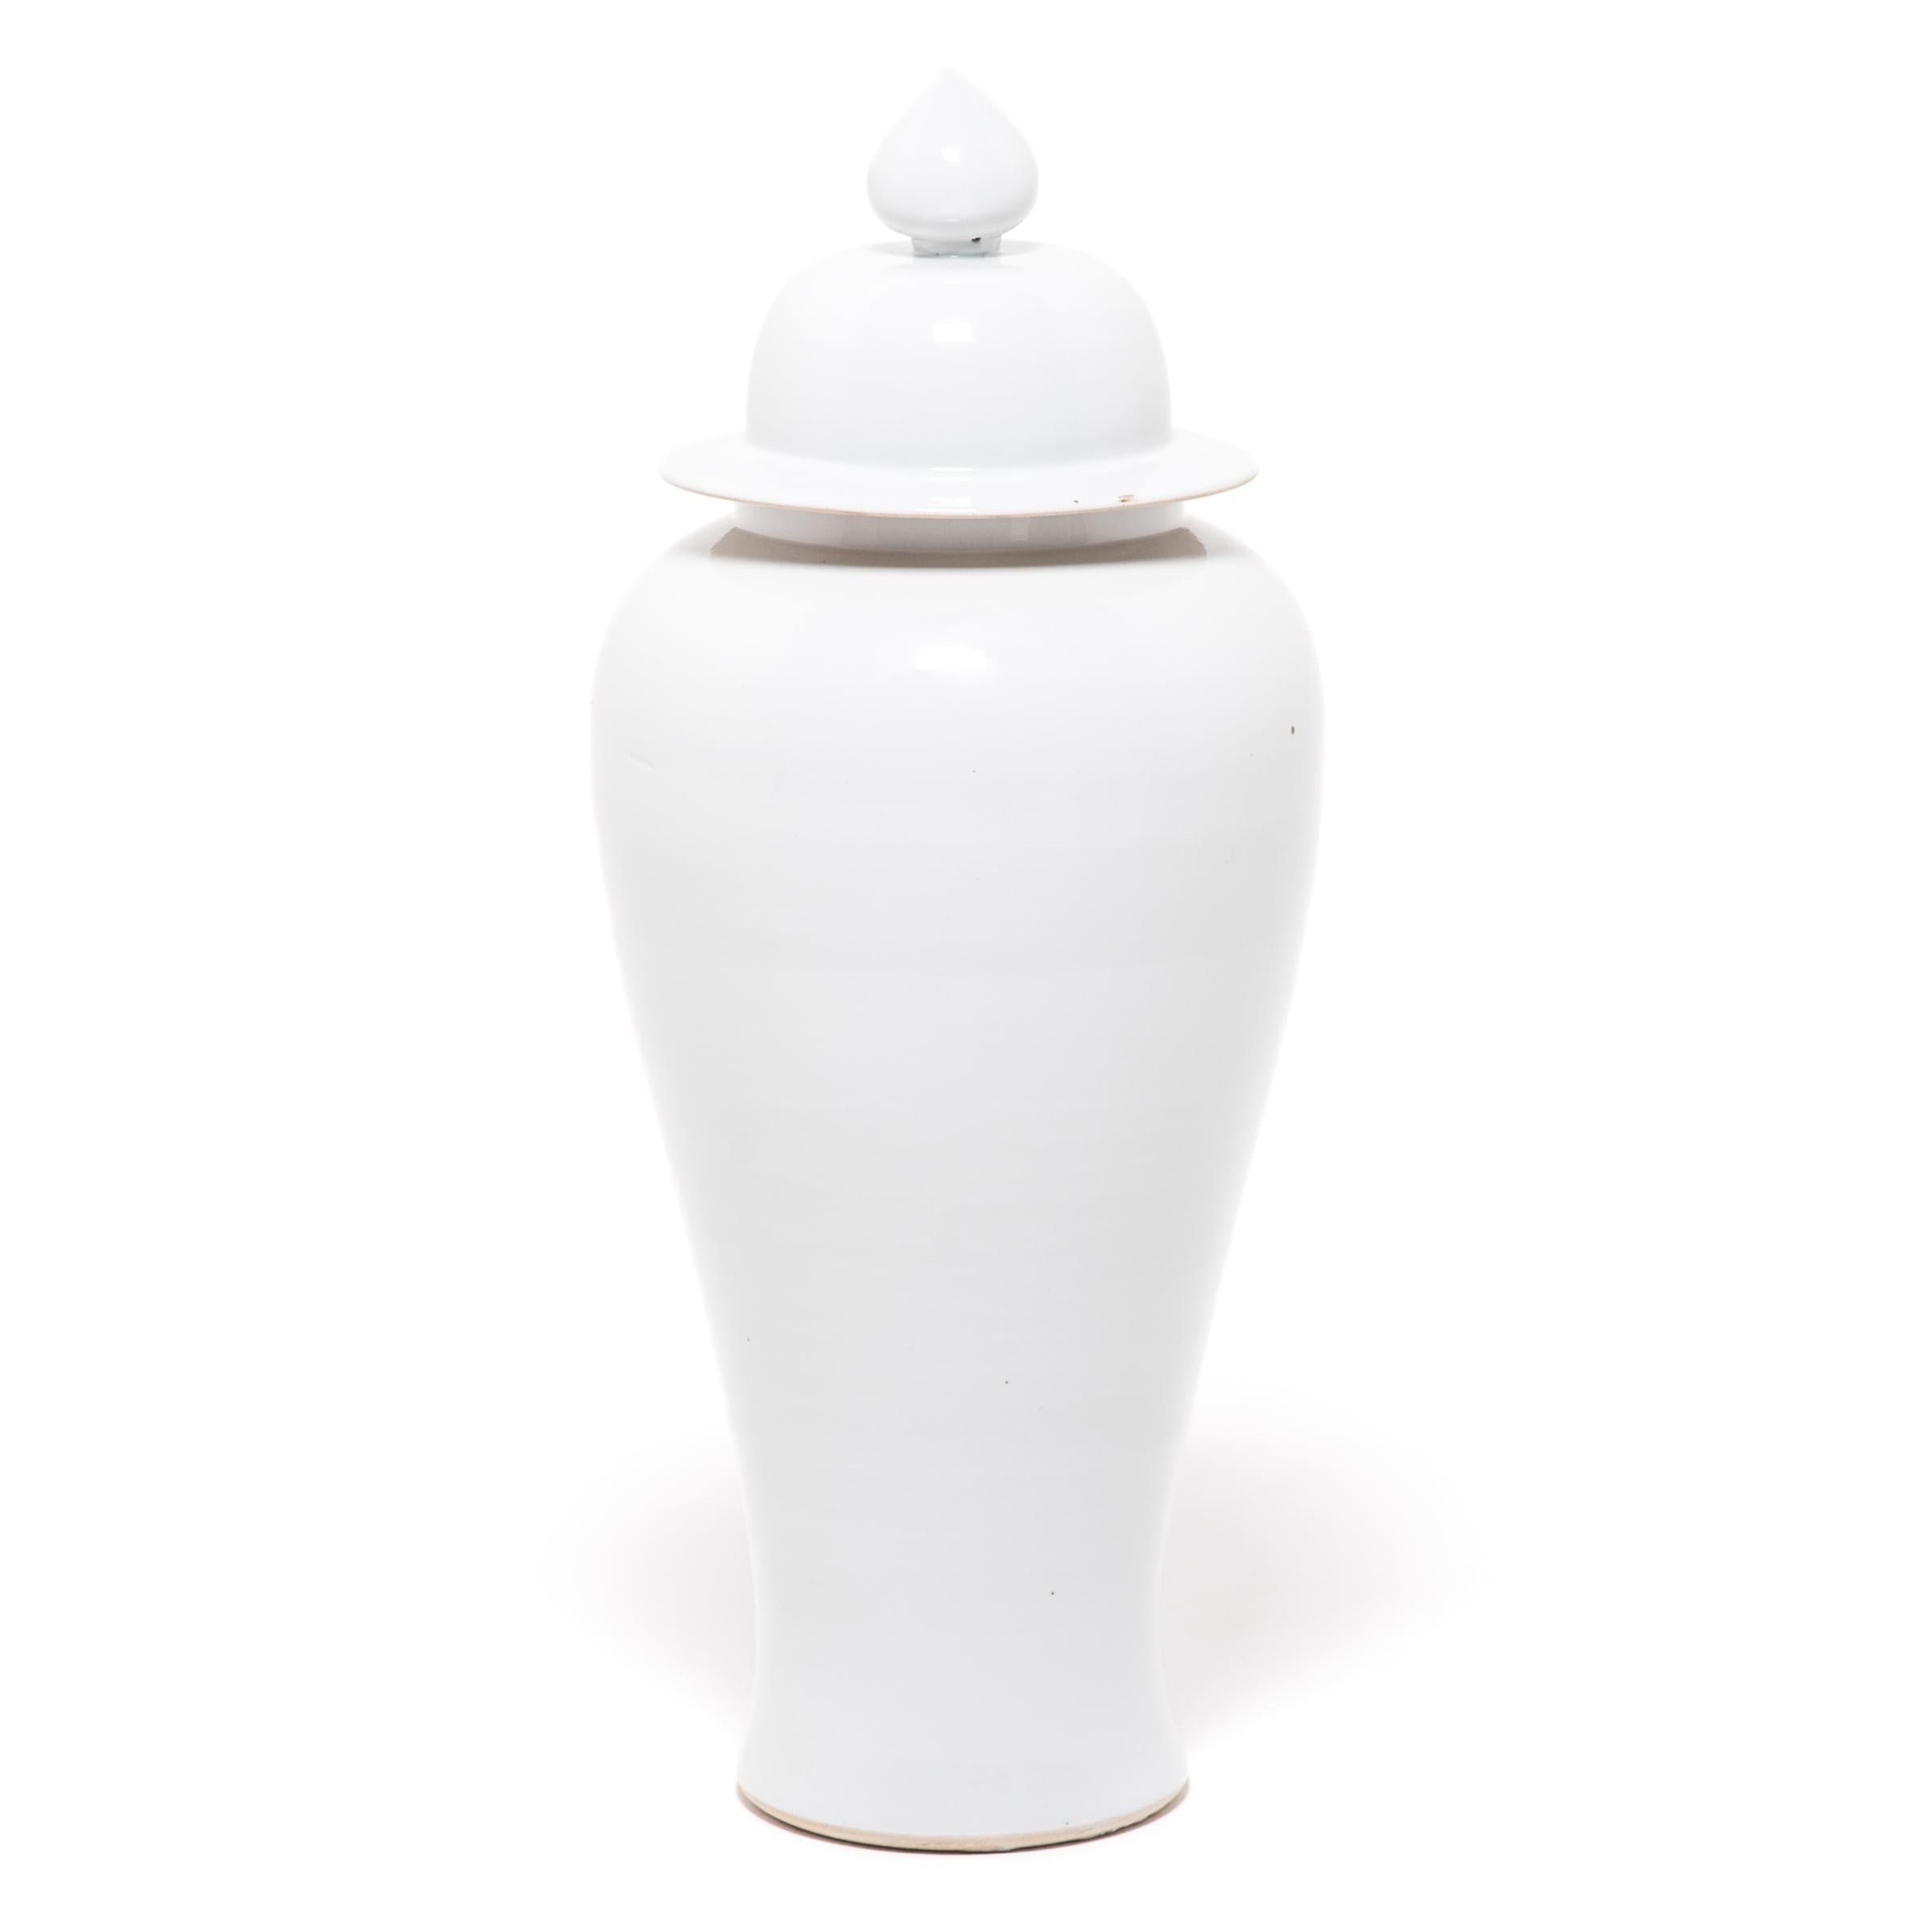 Defined by its rounded body, high shoulders and domed lid, the time-honored form of the Chinese ginger jar takes on a streamlined look in this contemporary interpretation made in China's Zhejiang province. Traditionally elaborately decorated, this